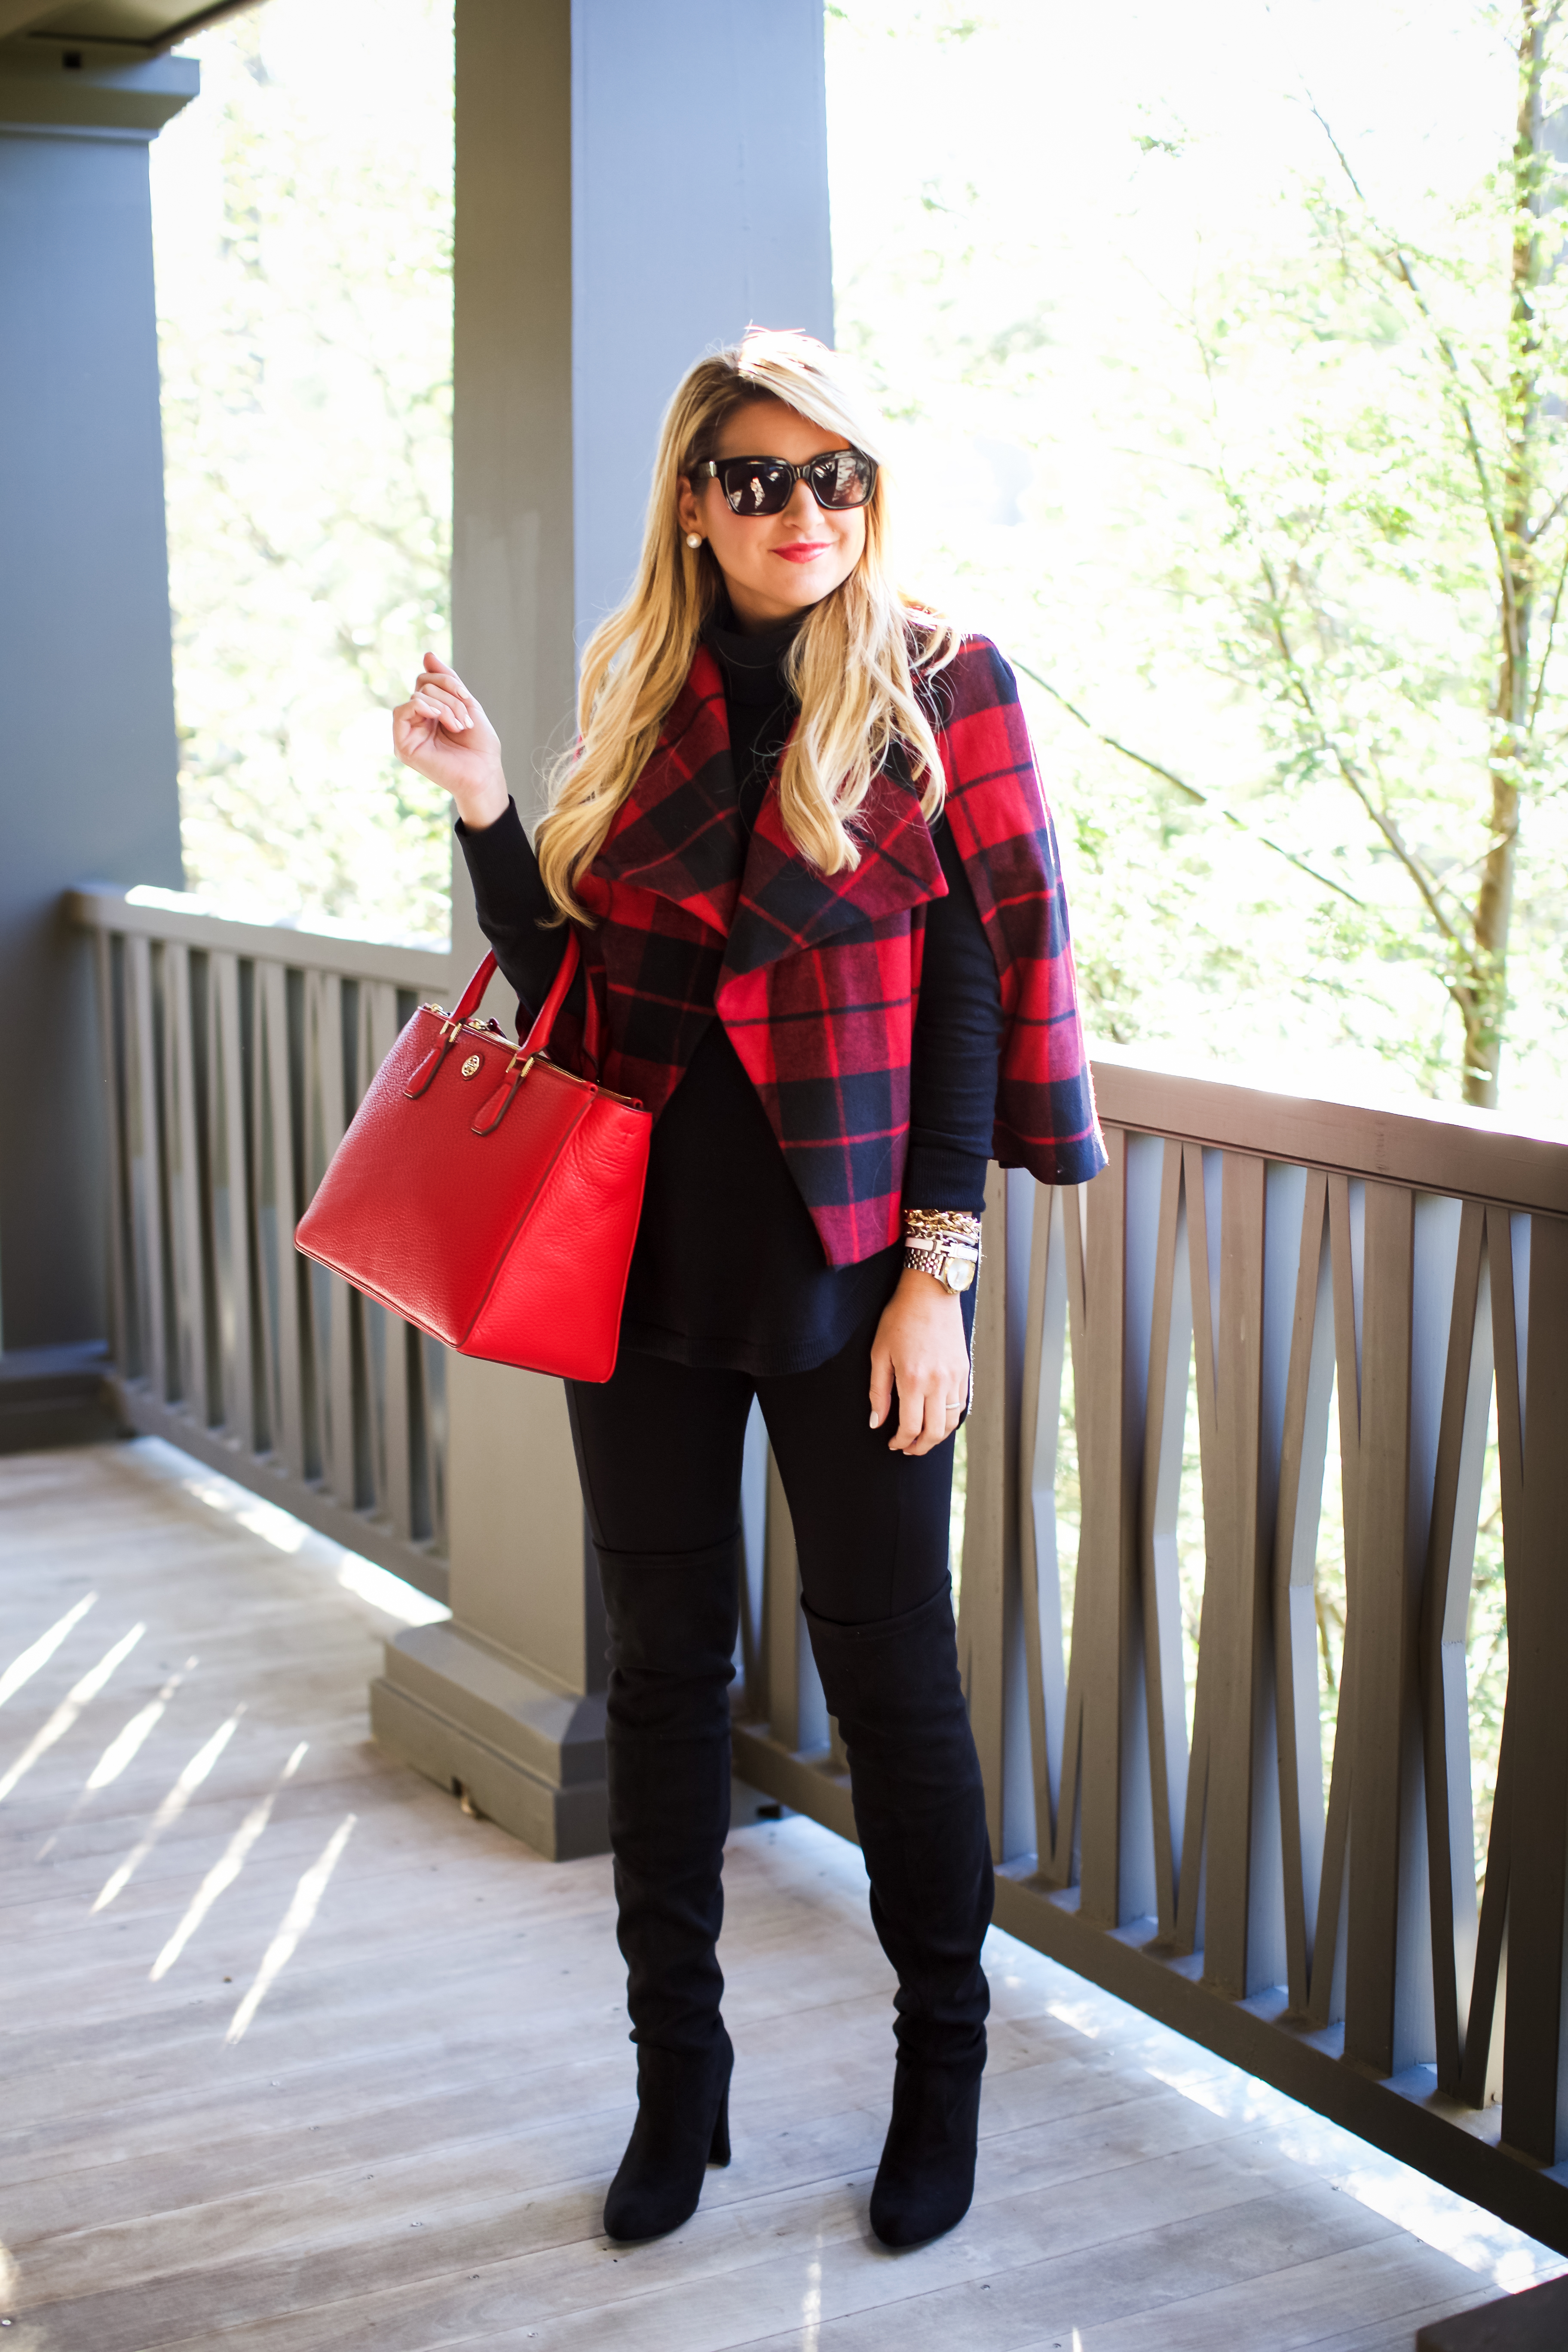 http://www.justdandy.org/wp-content/uploads/2015/11/Christmas-Outfit-Idea-Red-Buffalo-Plaid-Jacket-Over-the-Knee-Boots_-51.jpg